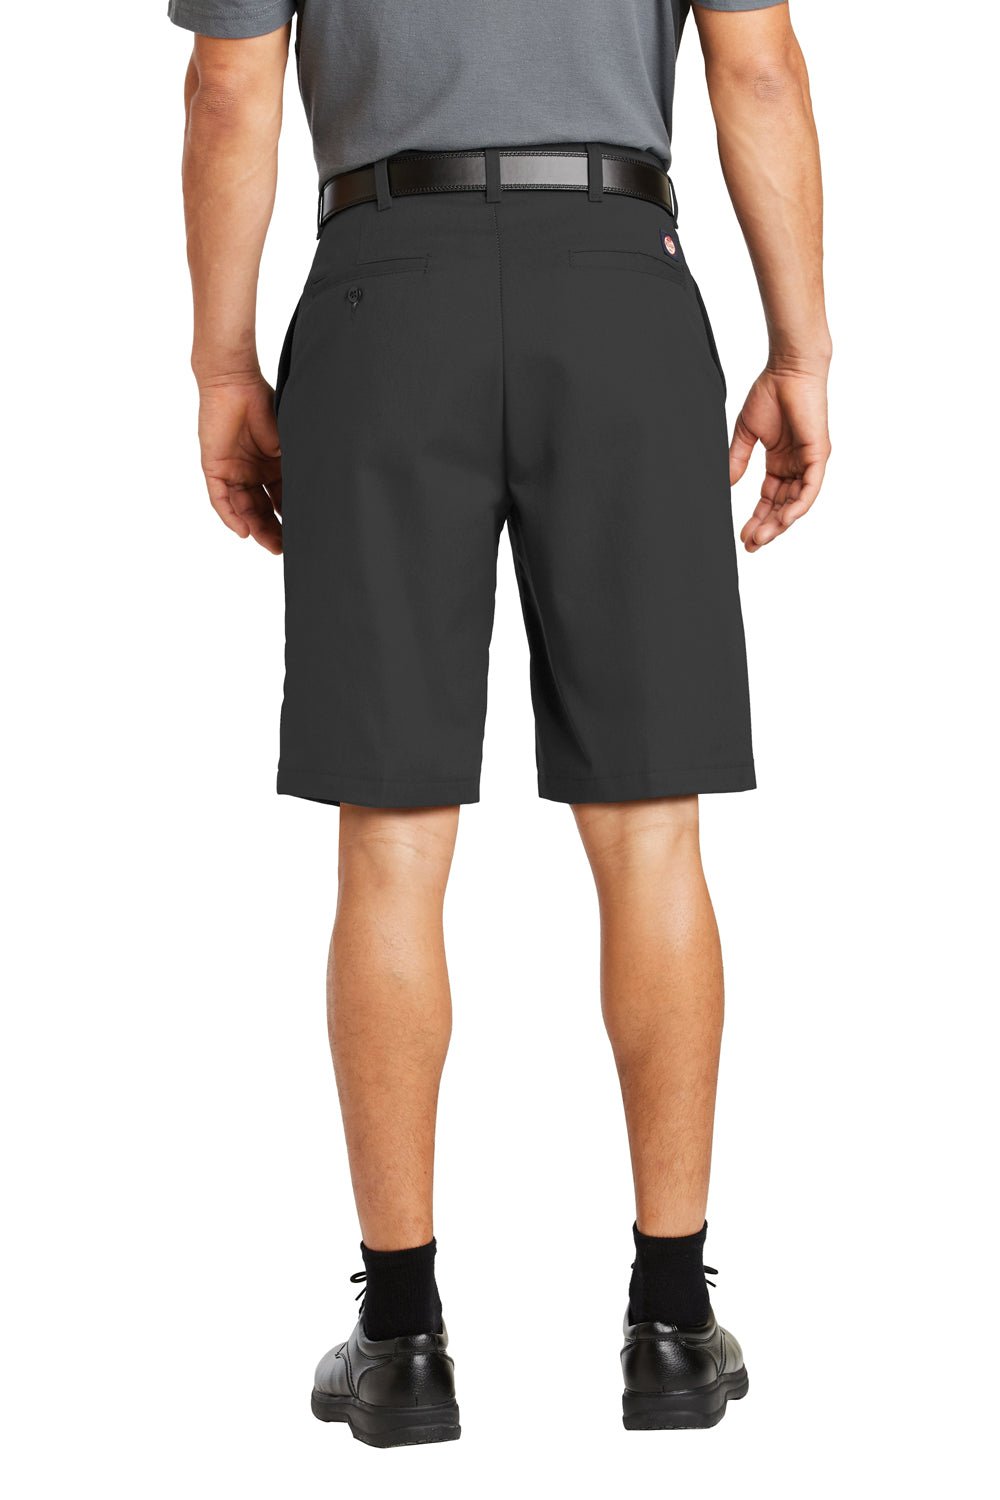 Red Kap PT26 Industrial Stain Resistant Work Shorts w/ Pockets Charcoal Grey Back